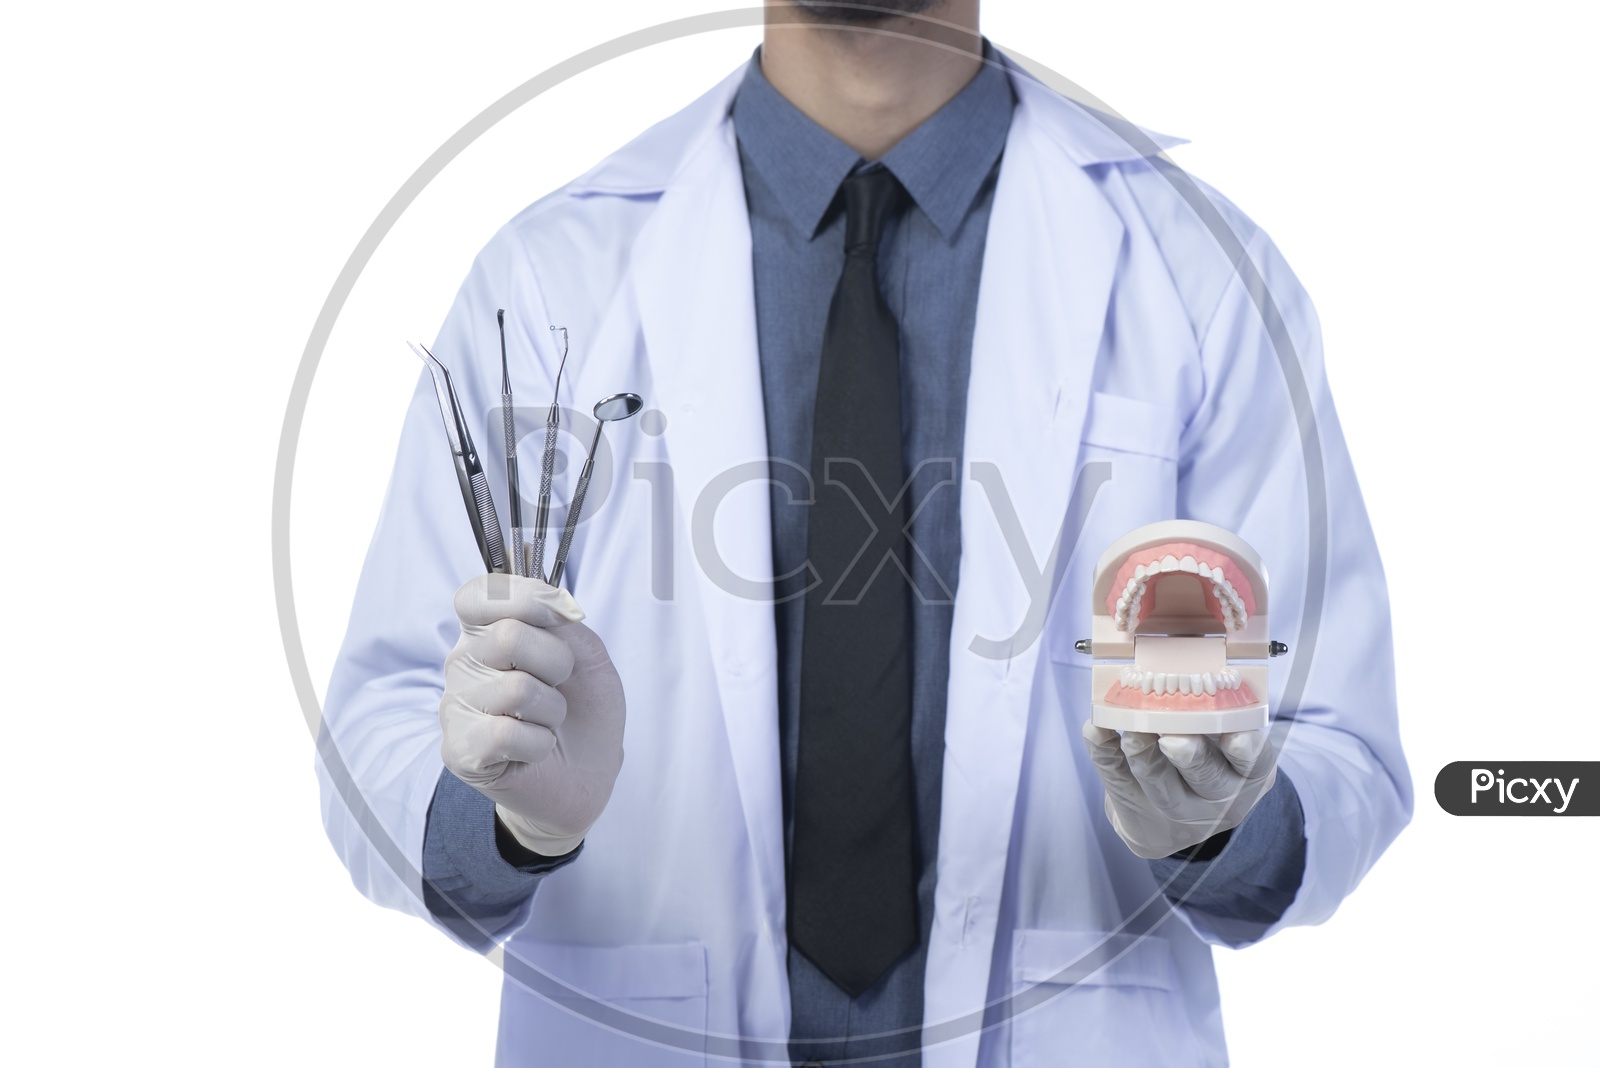 Asian Male Dentist Doctor with Dental tools isolated on white background